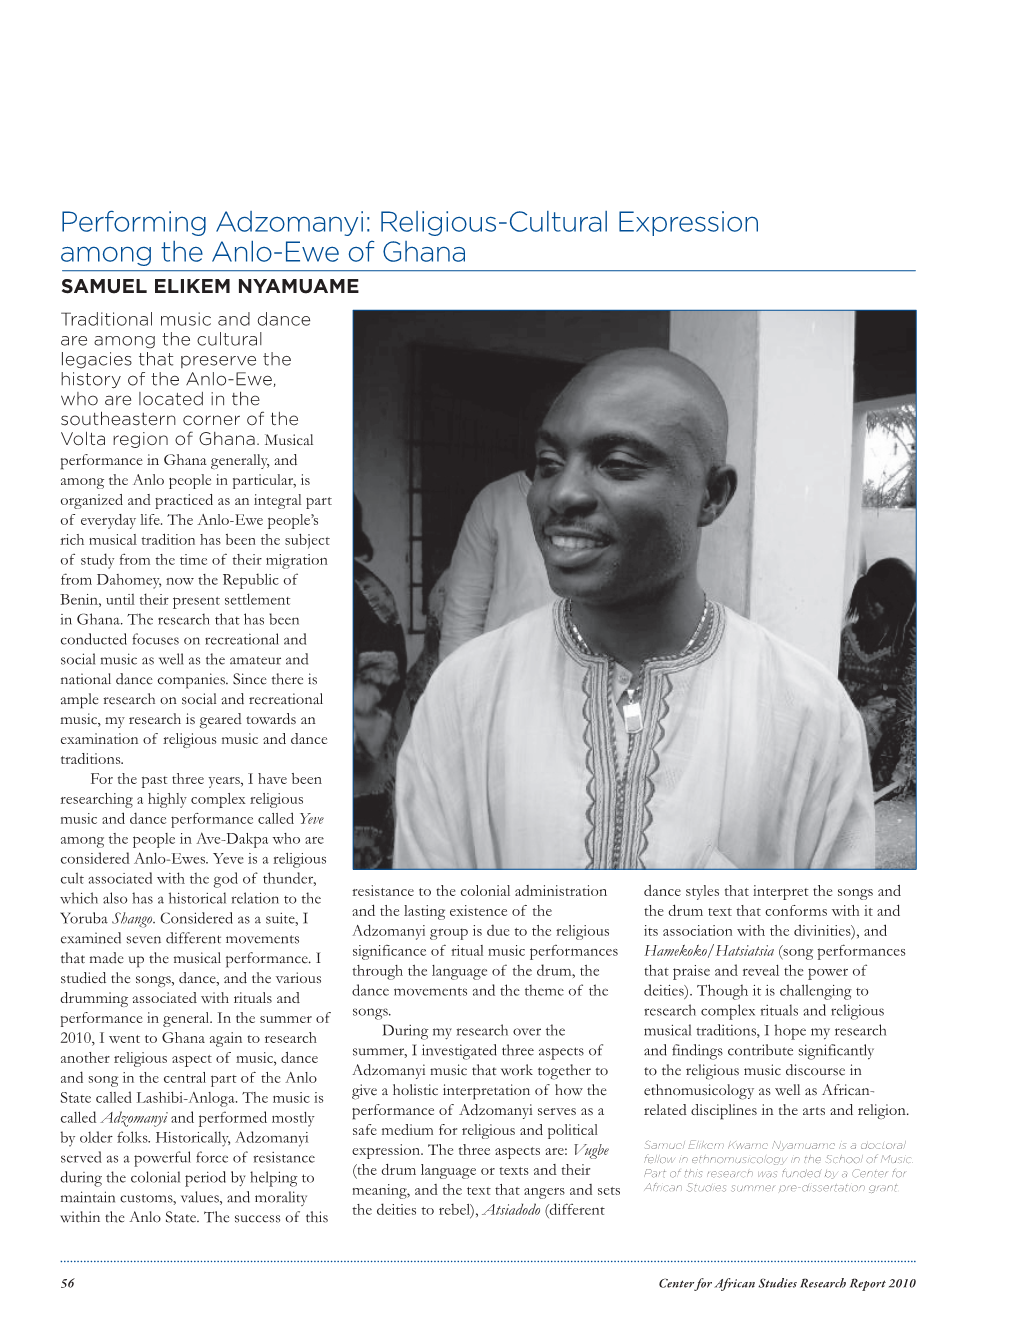 Religious-Cultural Expression Among the Anlo-Ewe of Ghana